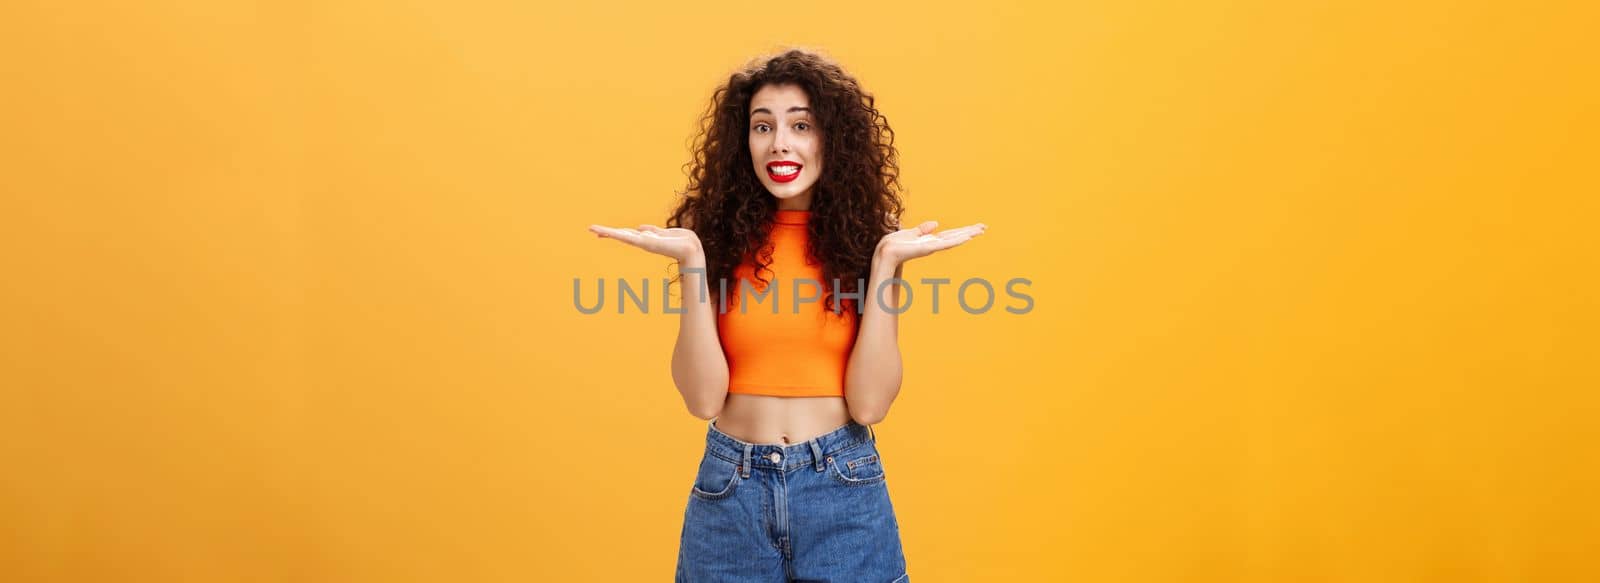 Oops honey sorry. Clueless silly stylish european female with curly hairstyle in cropped top shrugging with hands spread aside in unaware gesture smiling guilty and questioned over orange background.